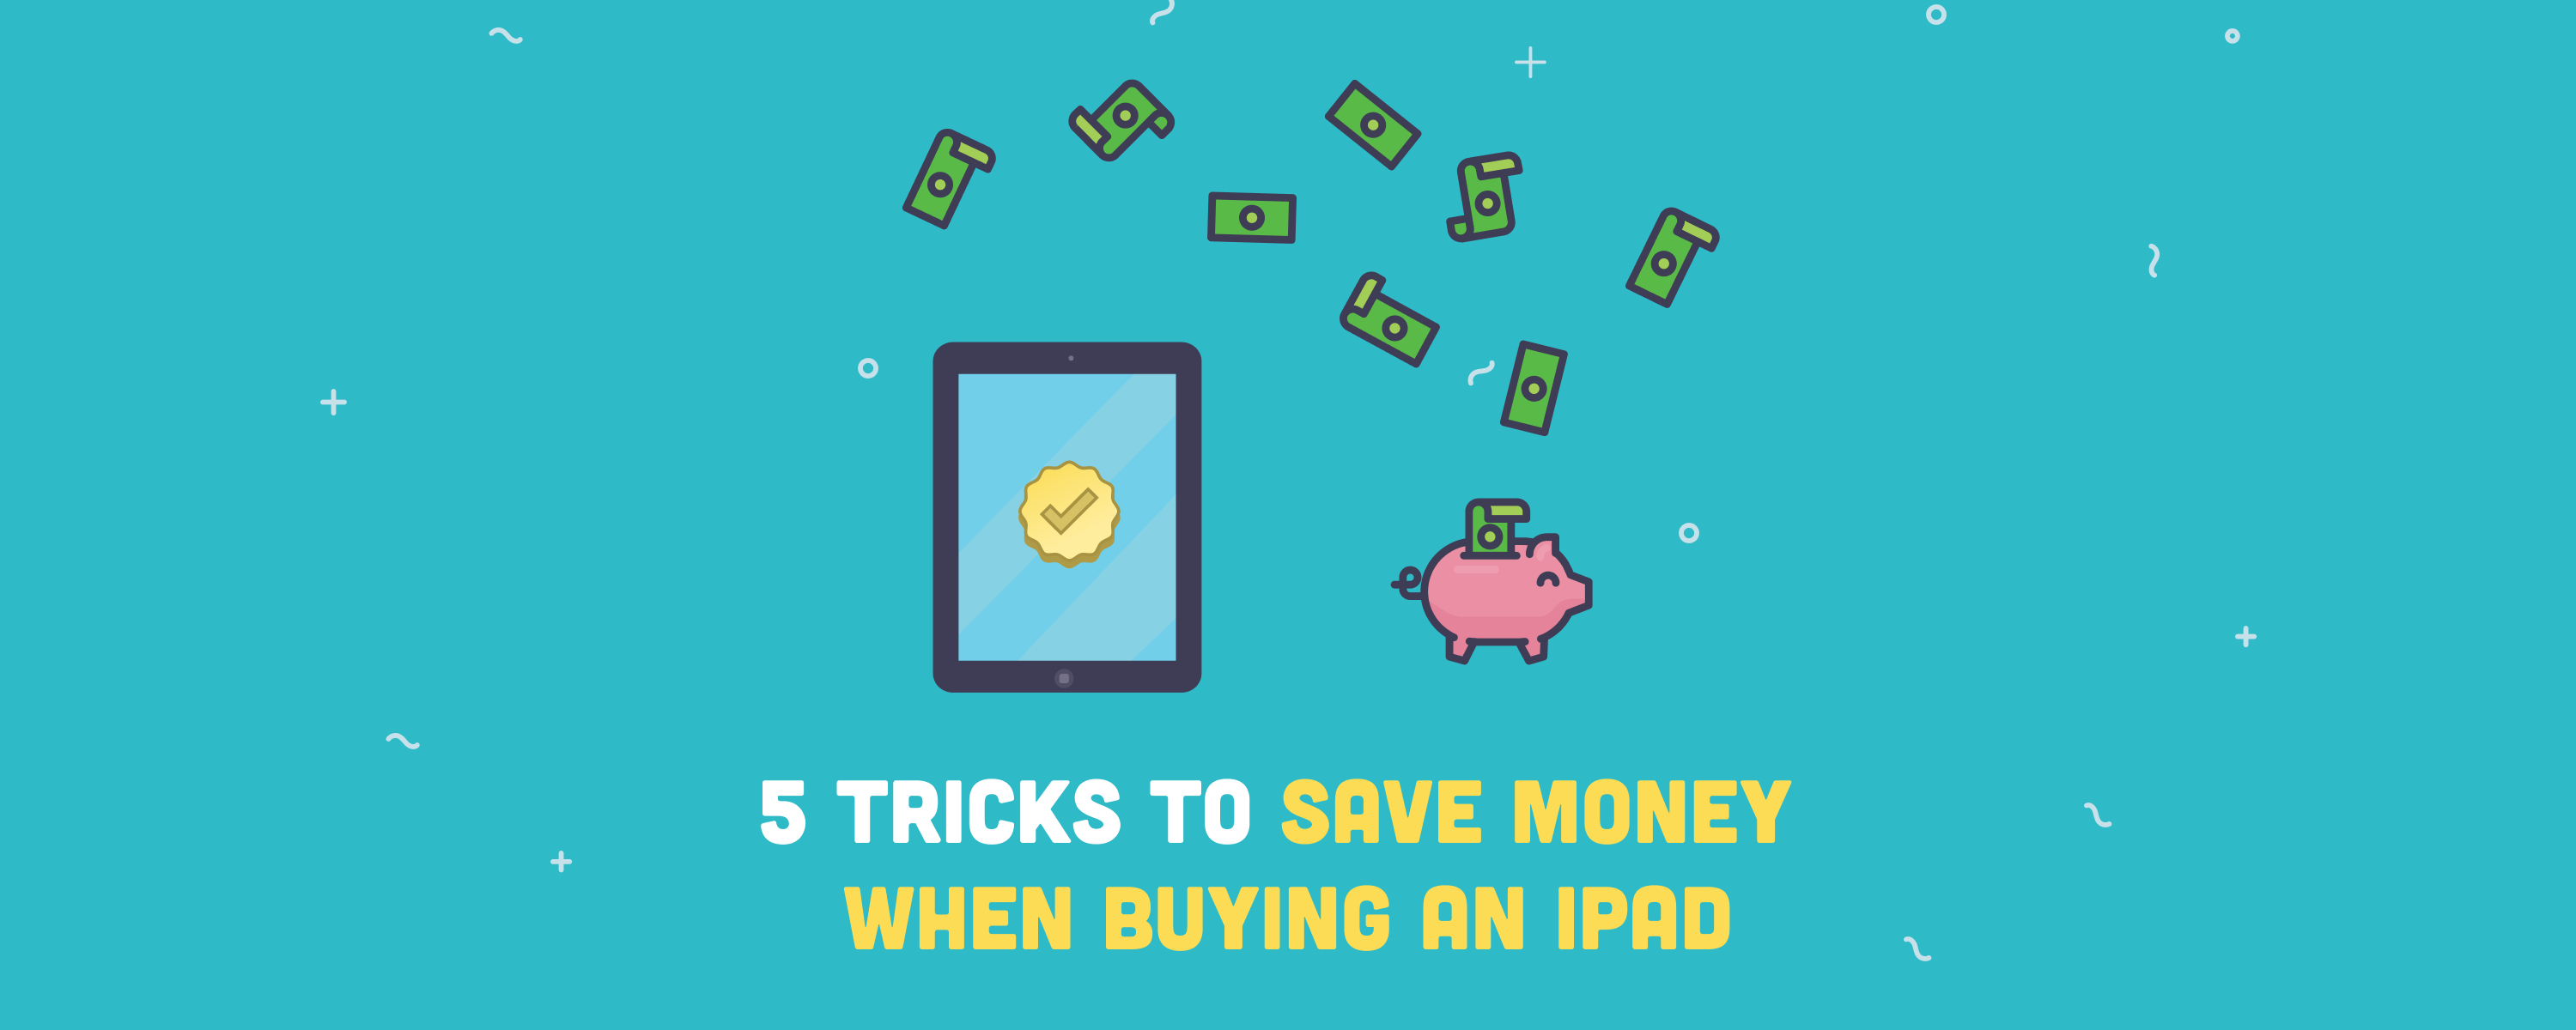 5 Tricks to Save Up Money When Buying an iPad